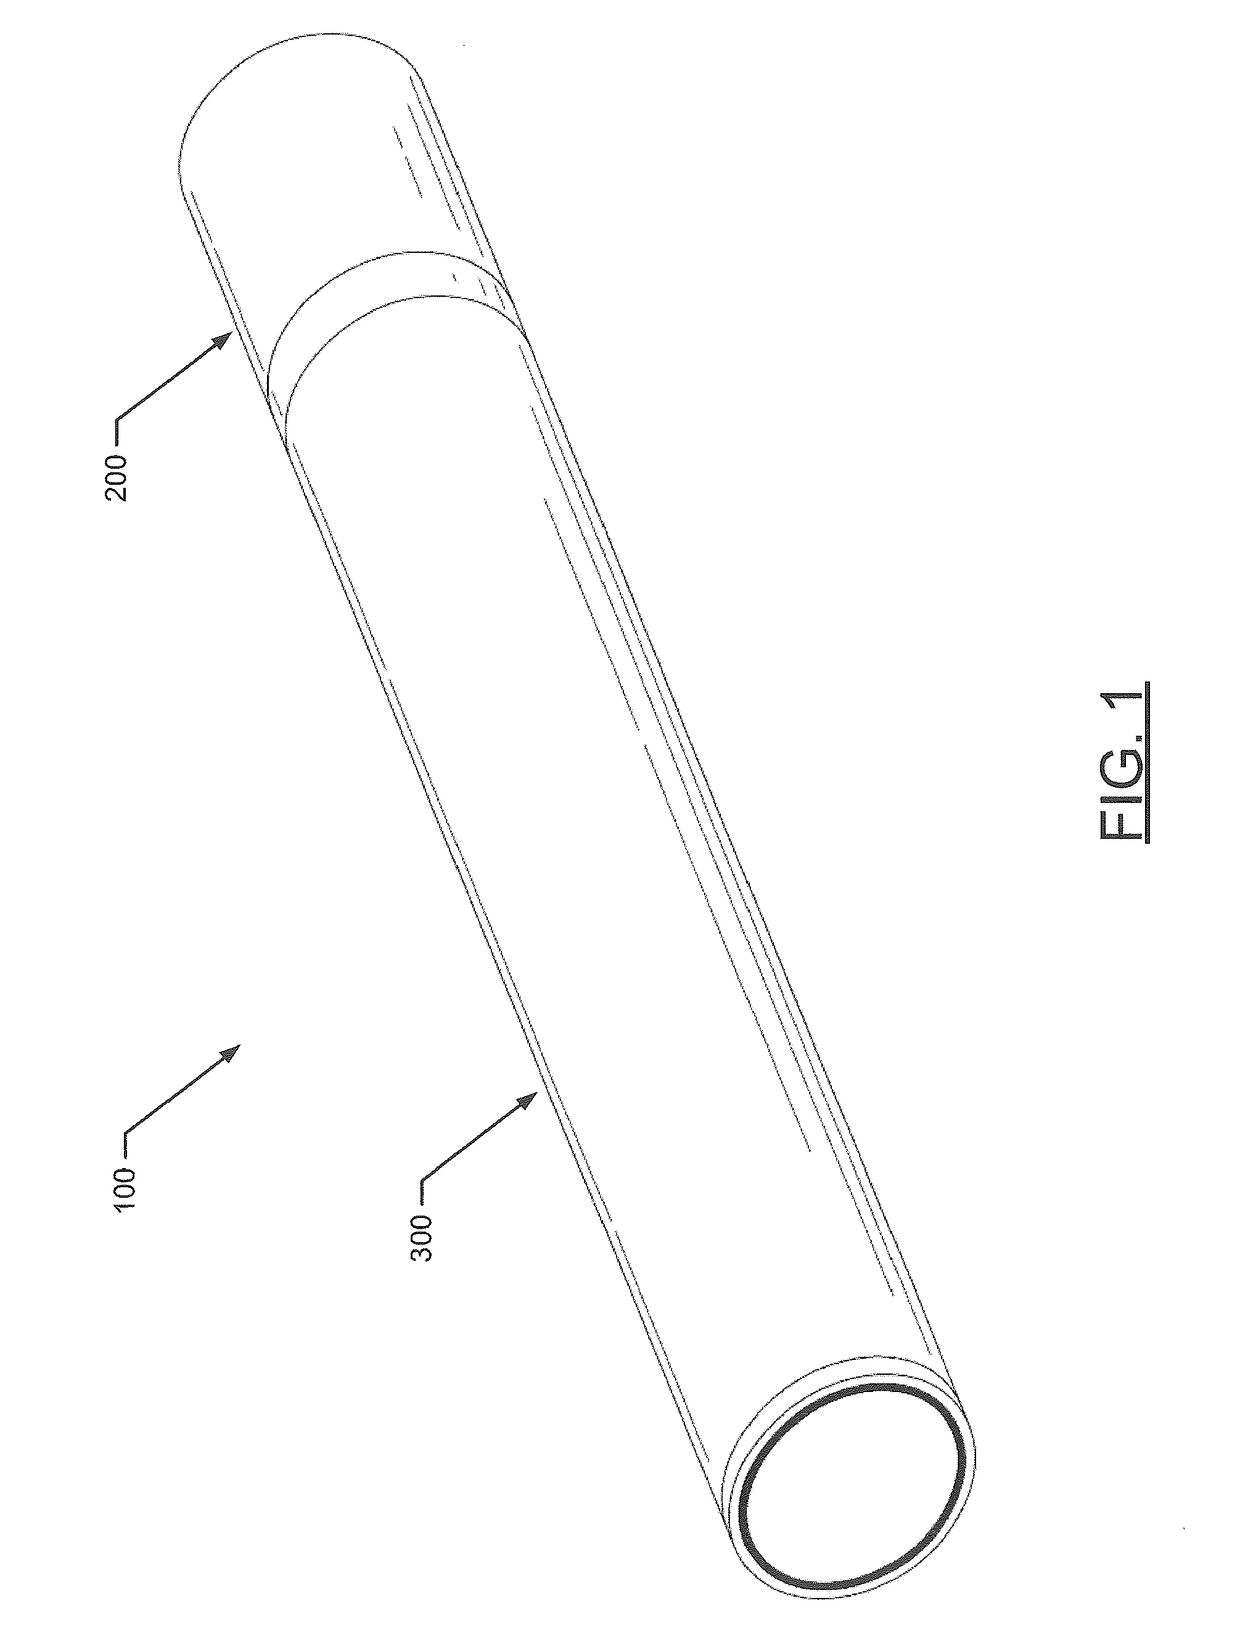 Aerosol delivery device including a wirelessly-heated atomizer and related method